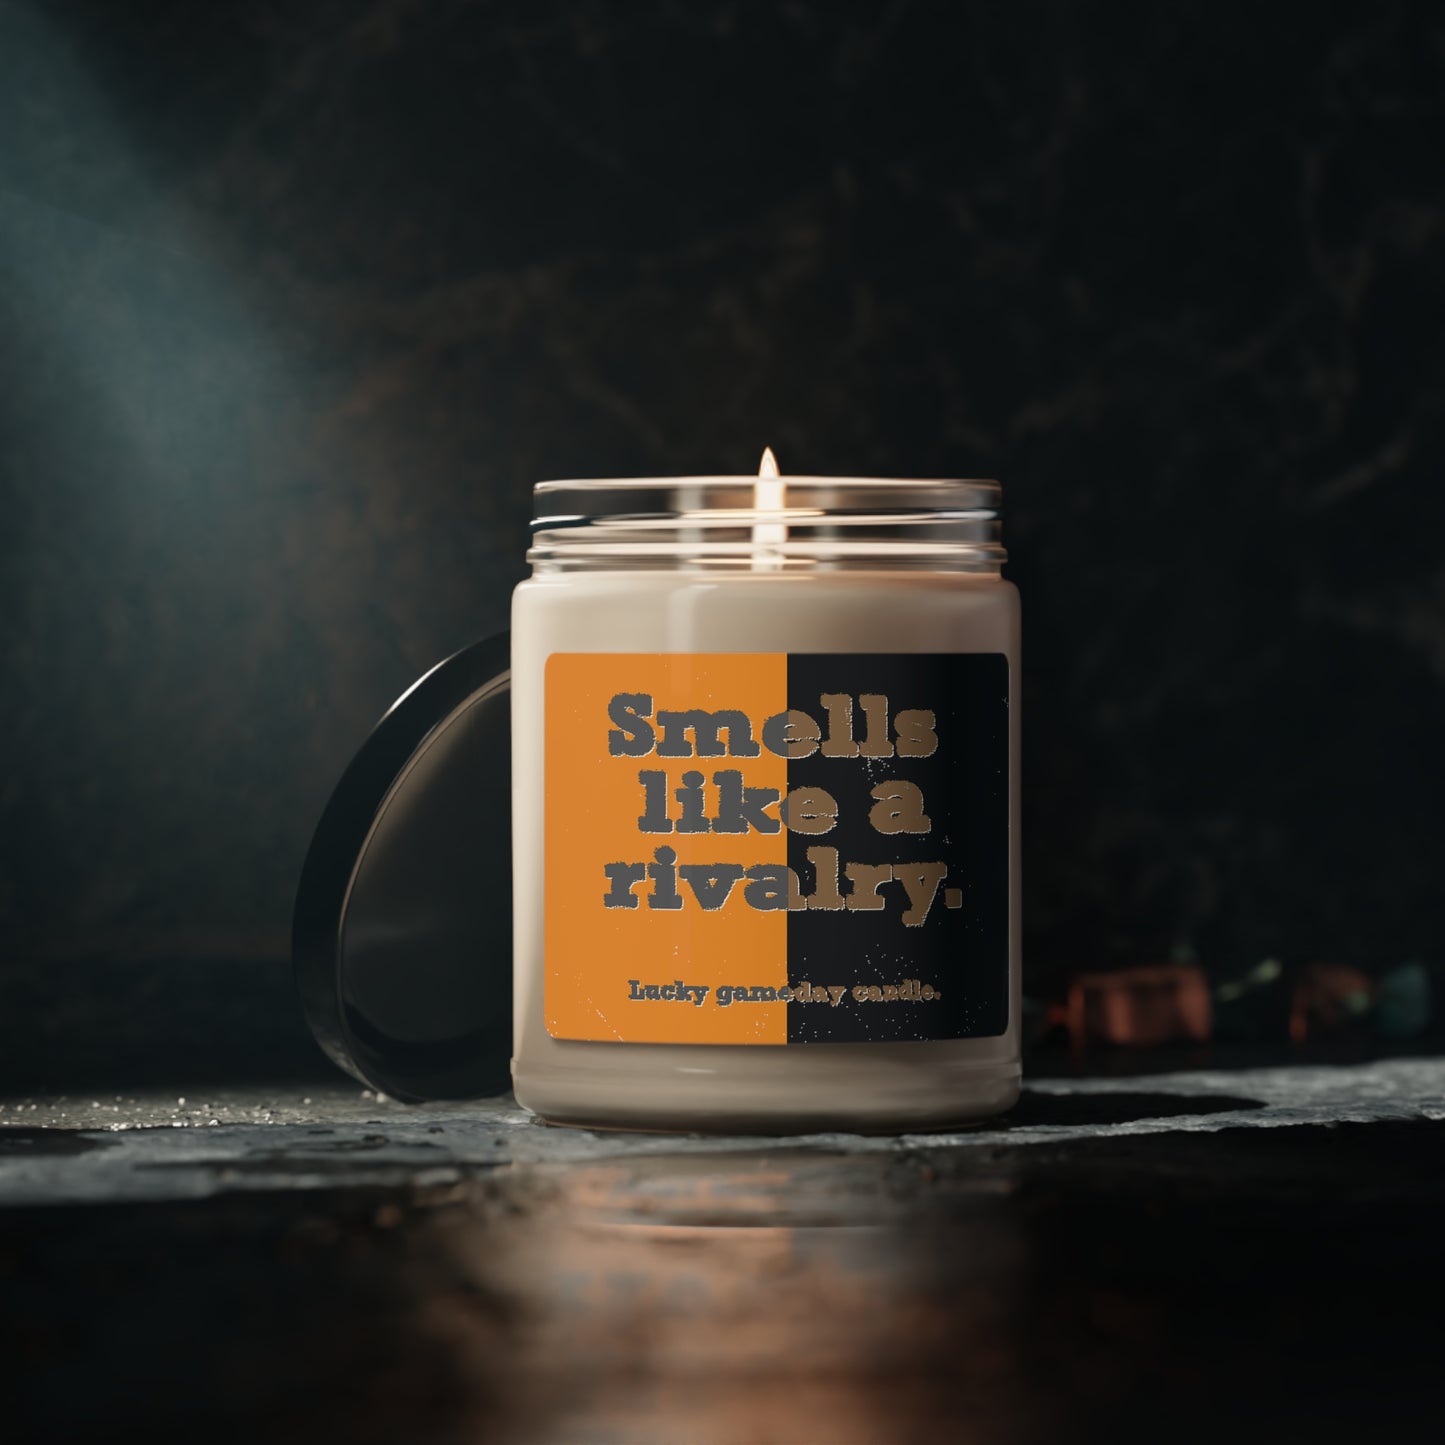 Tennessee vs. Vanderbilt - "Smells Like a Rivalry" Scented Candle